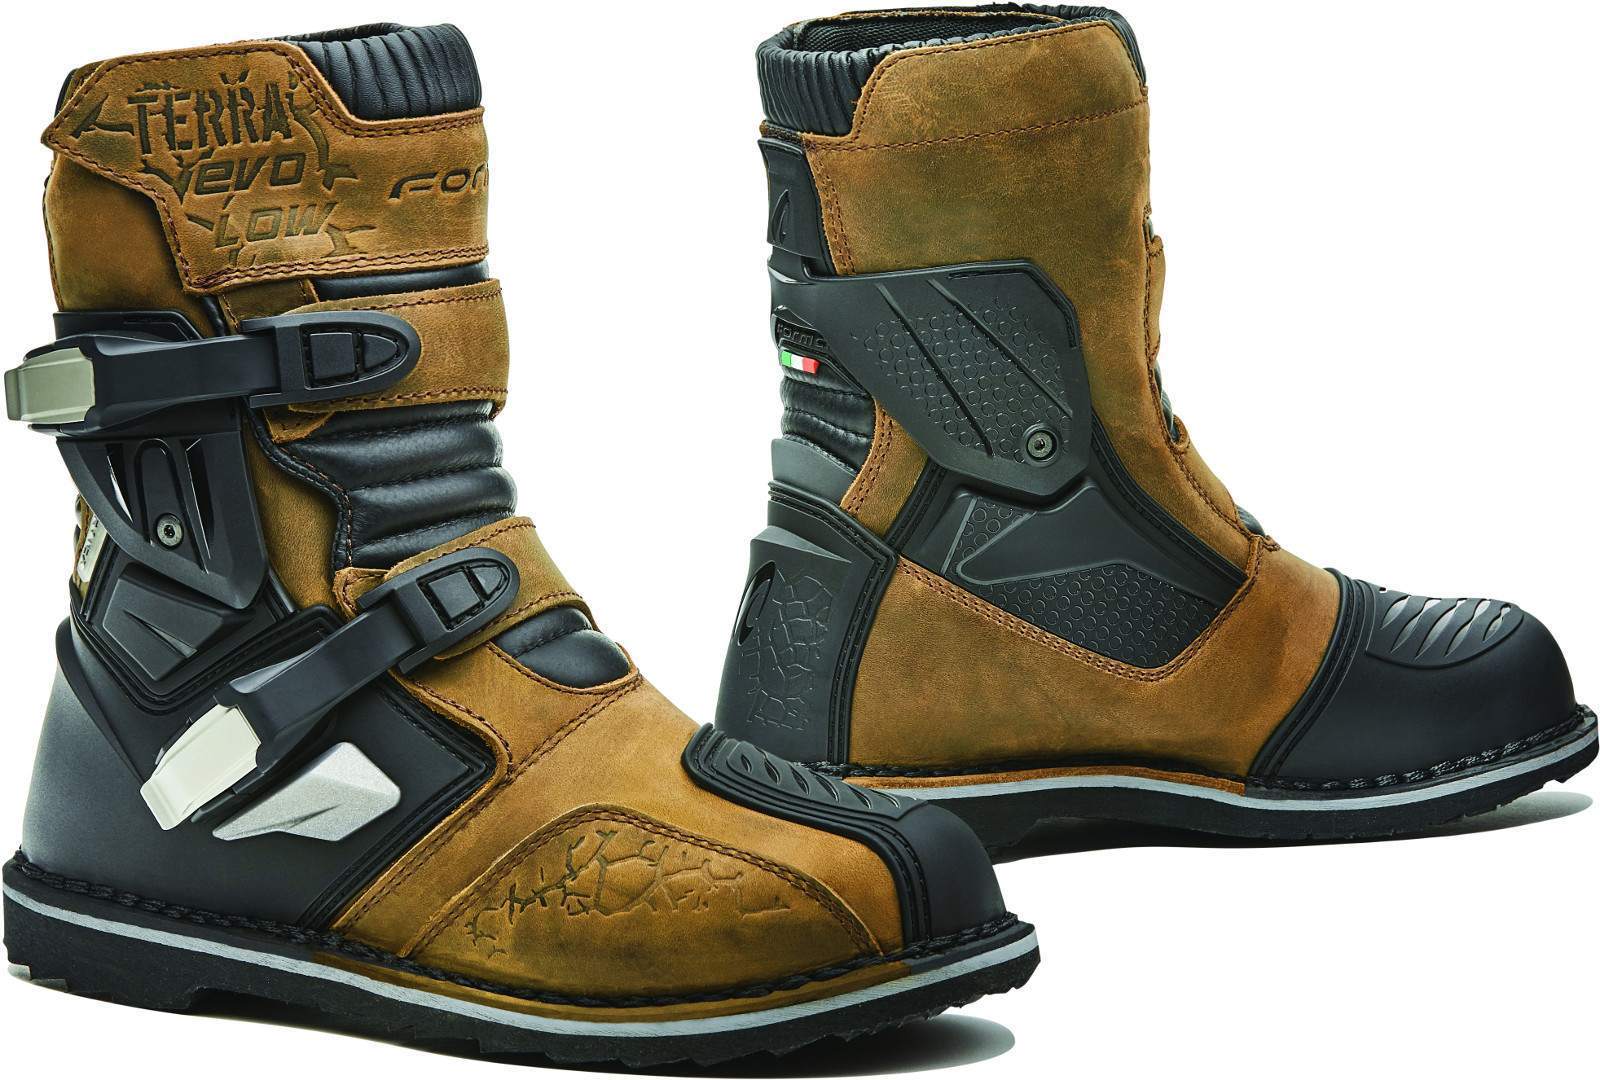 Image of Forma Terra Evo Low Brown Size 48 ID 8052998023013